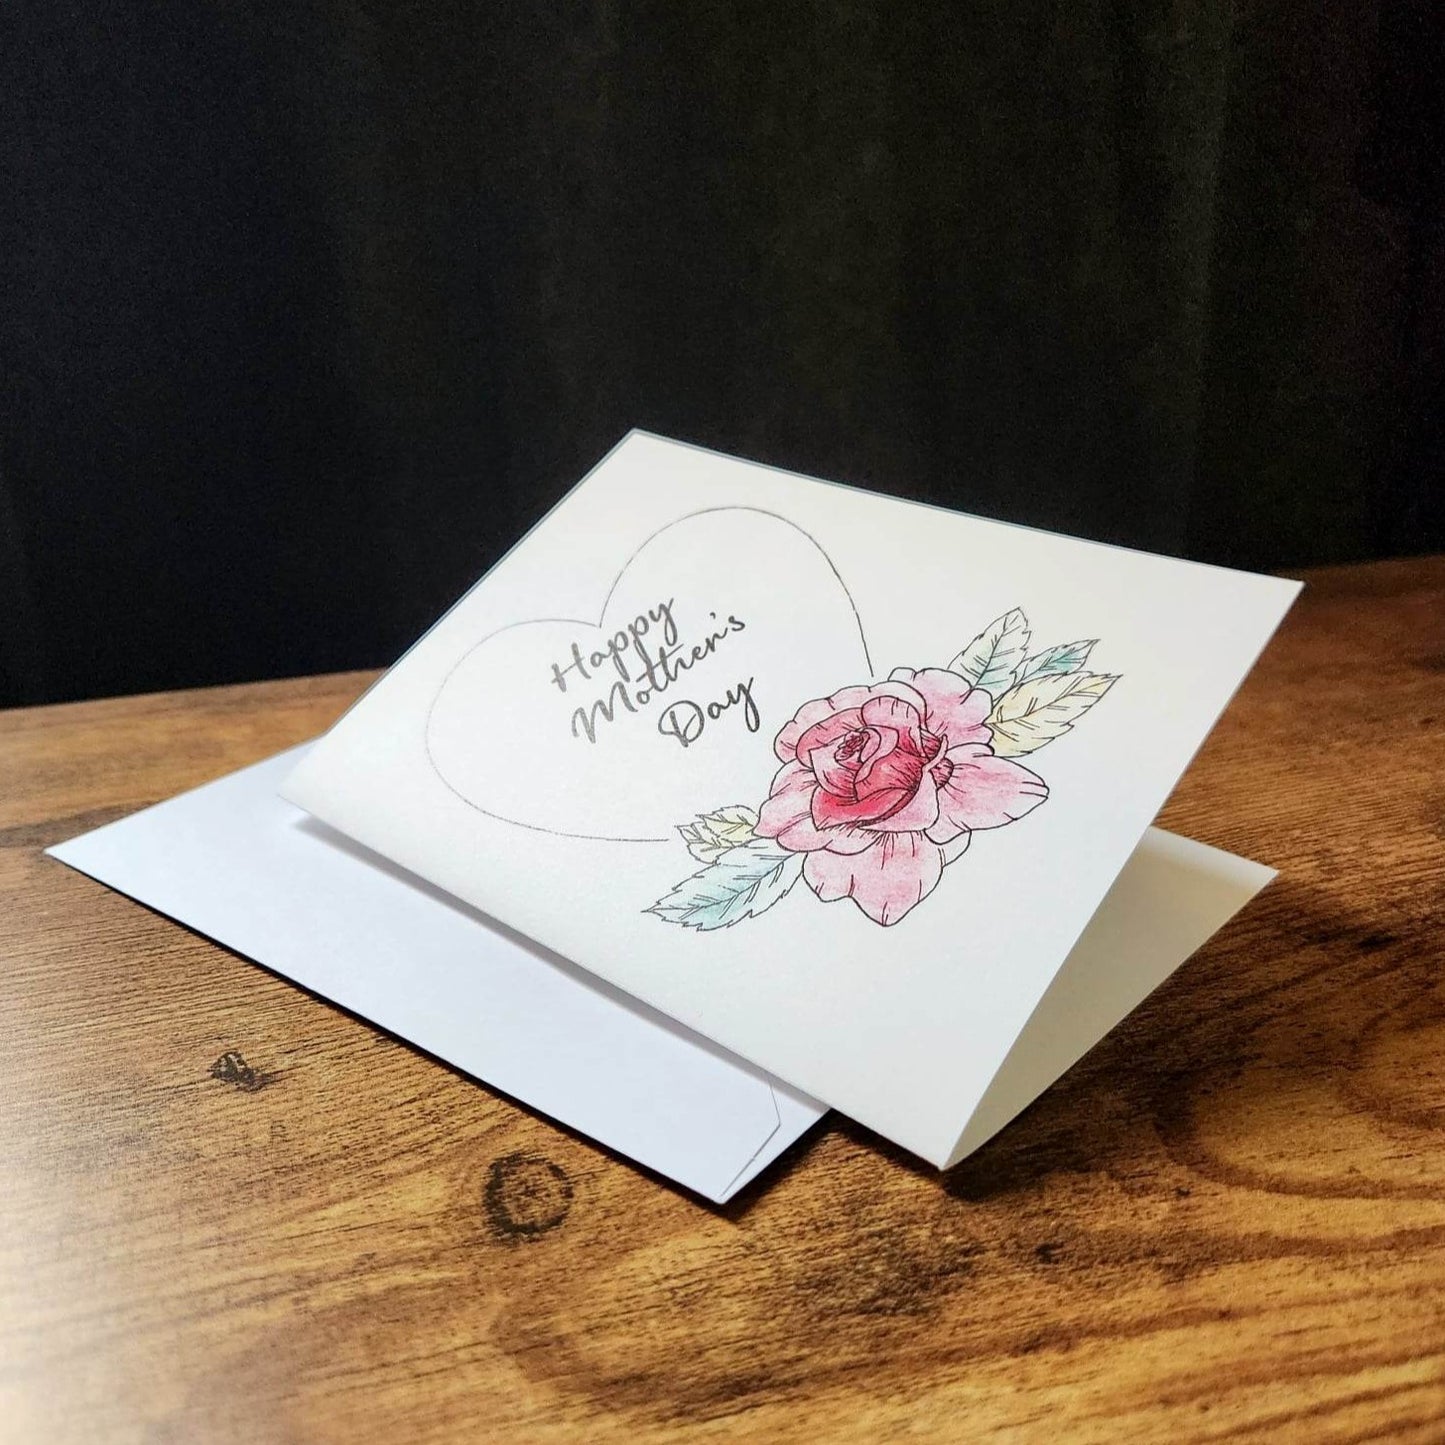 Happy Mother's day card, Pink rose card for mom, Floral Mother's day card, Pretty card for mom, Mother's day greeting card, Handmade card